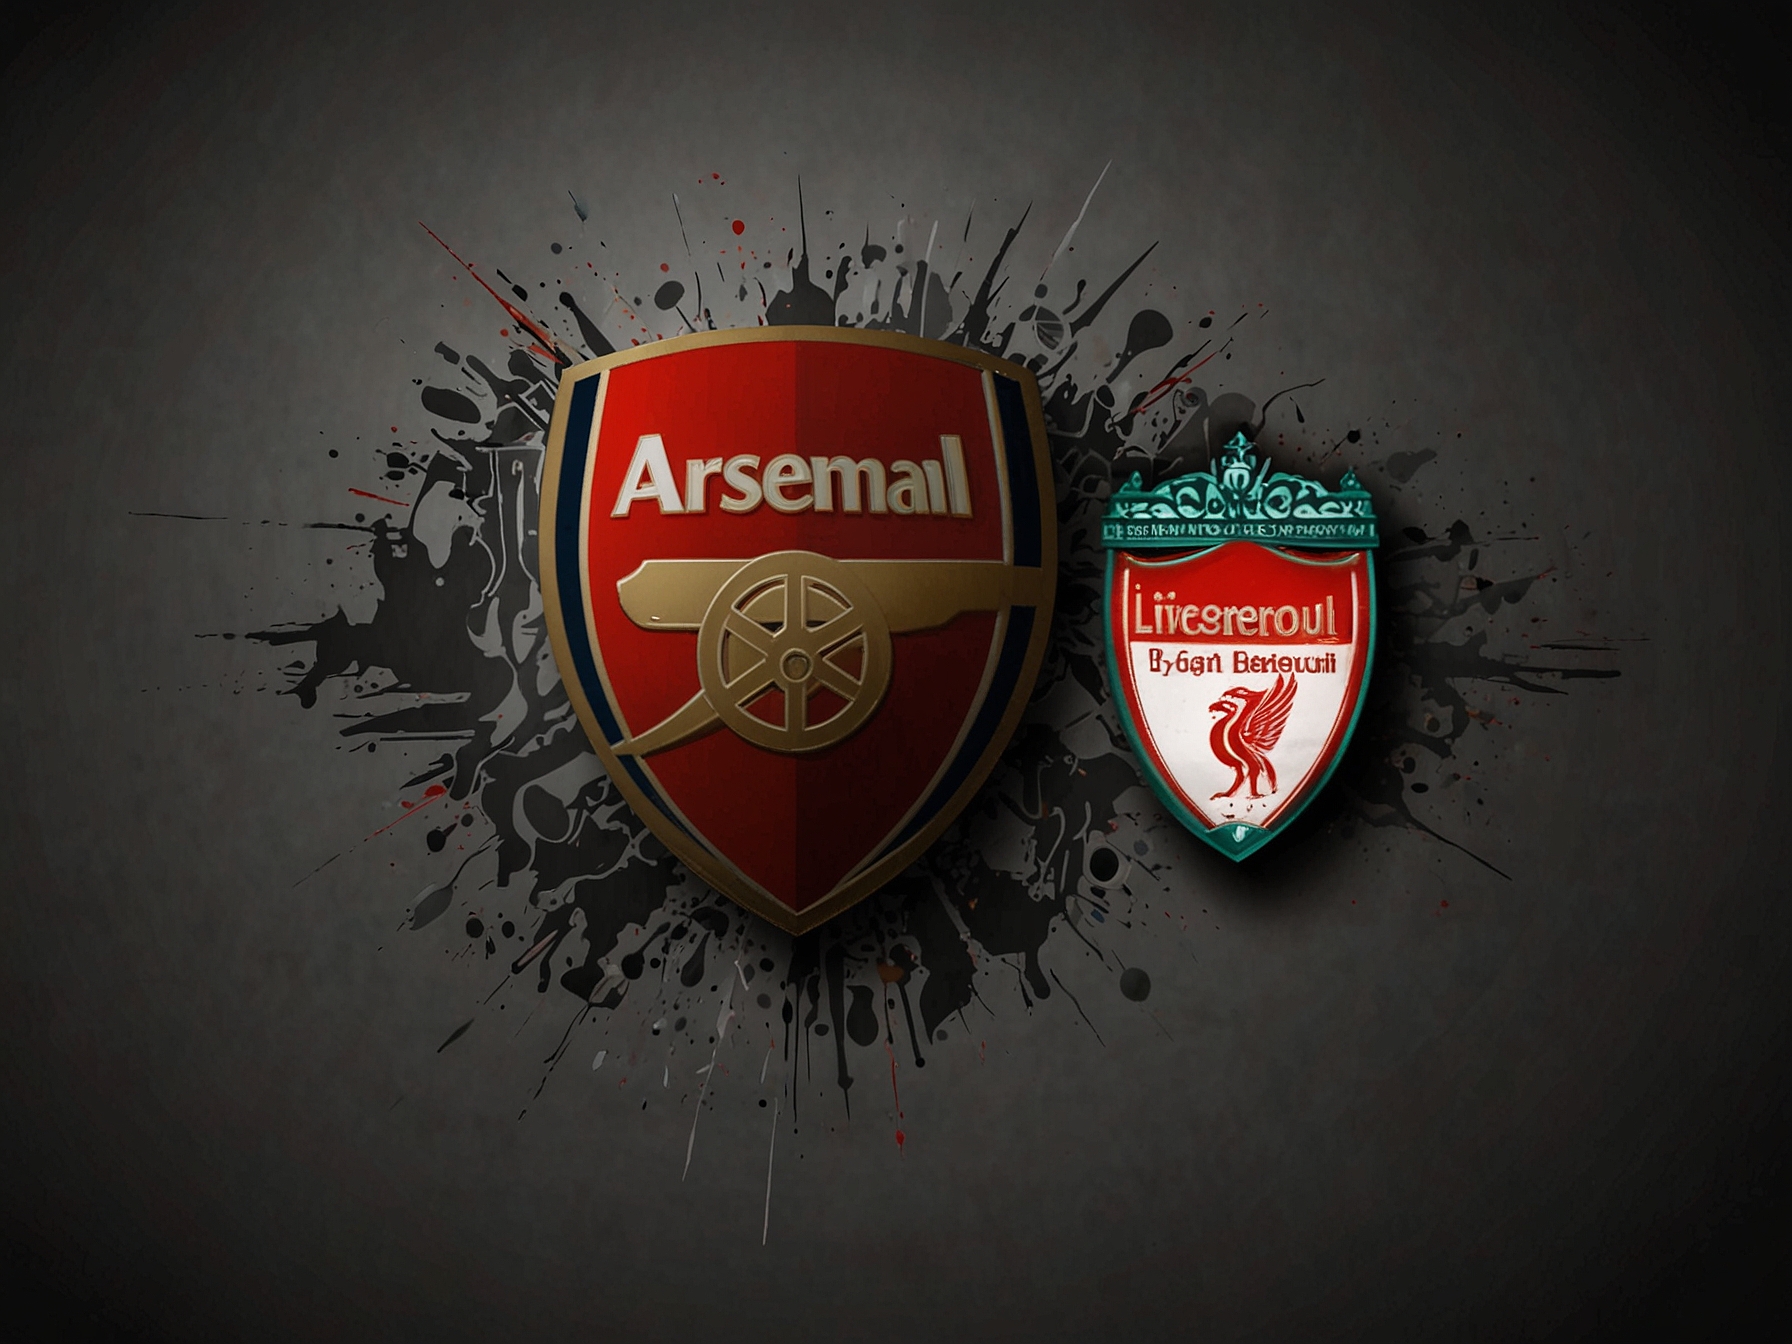 An image illustrating Arsenal and Liverpool's logos with the player's silhouette in the center, symbolizing the transfer market excitement and speculation about his potential new club.